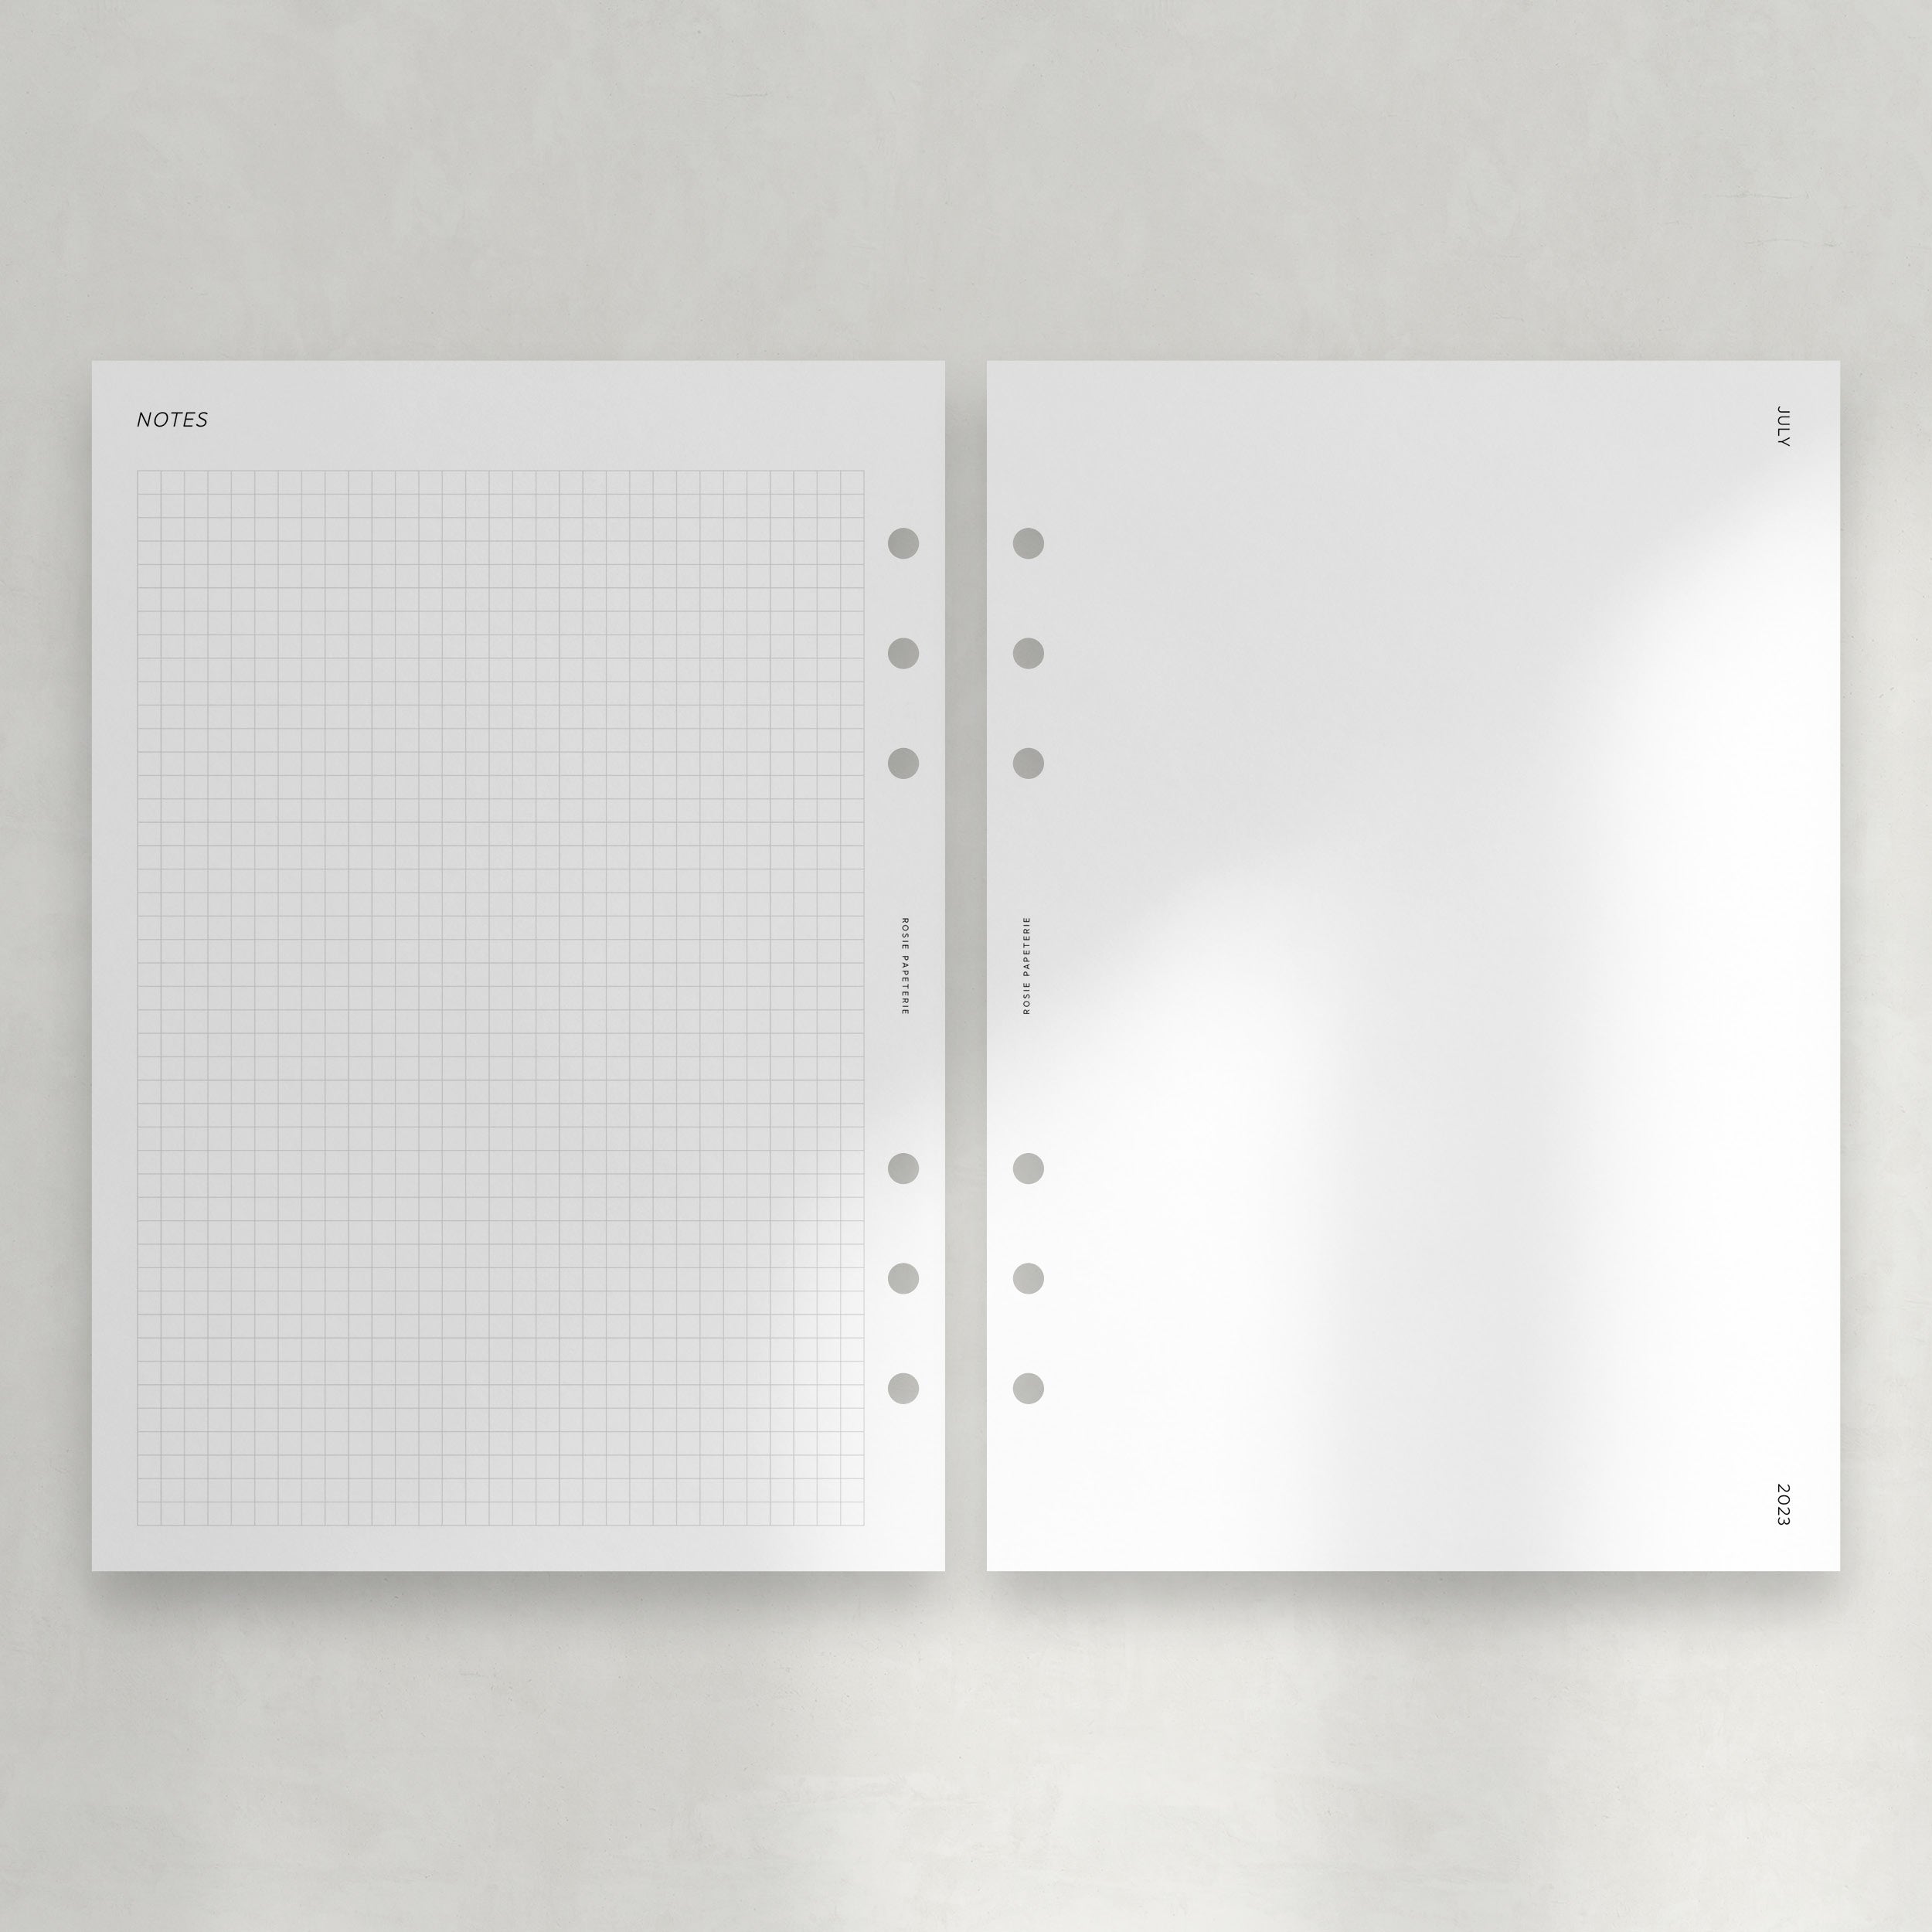  2023-2024 Planner Refills - 2023-2024 Weekly & Monthly Planner  Refill, July 2023-June 2024, 7-Hole Punched, Desk Size 4, 5.8 x 8.3,  Ocean : Office Products